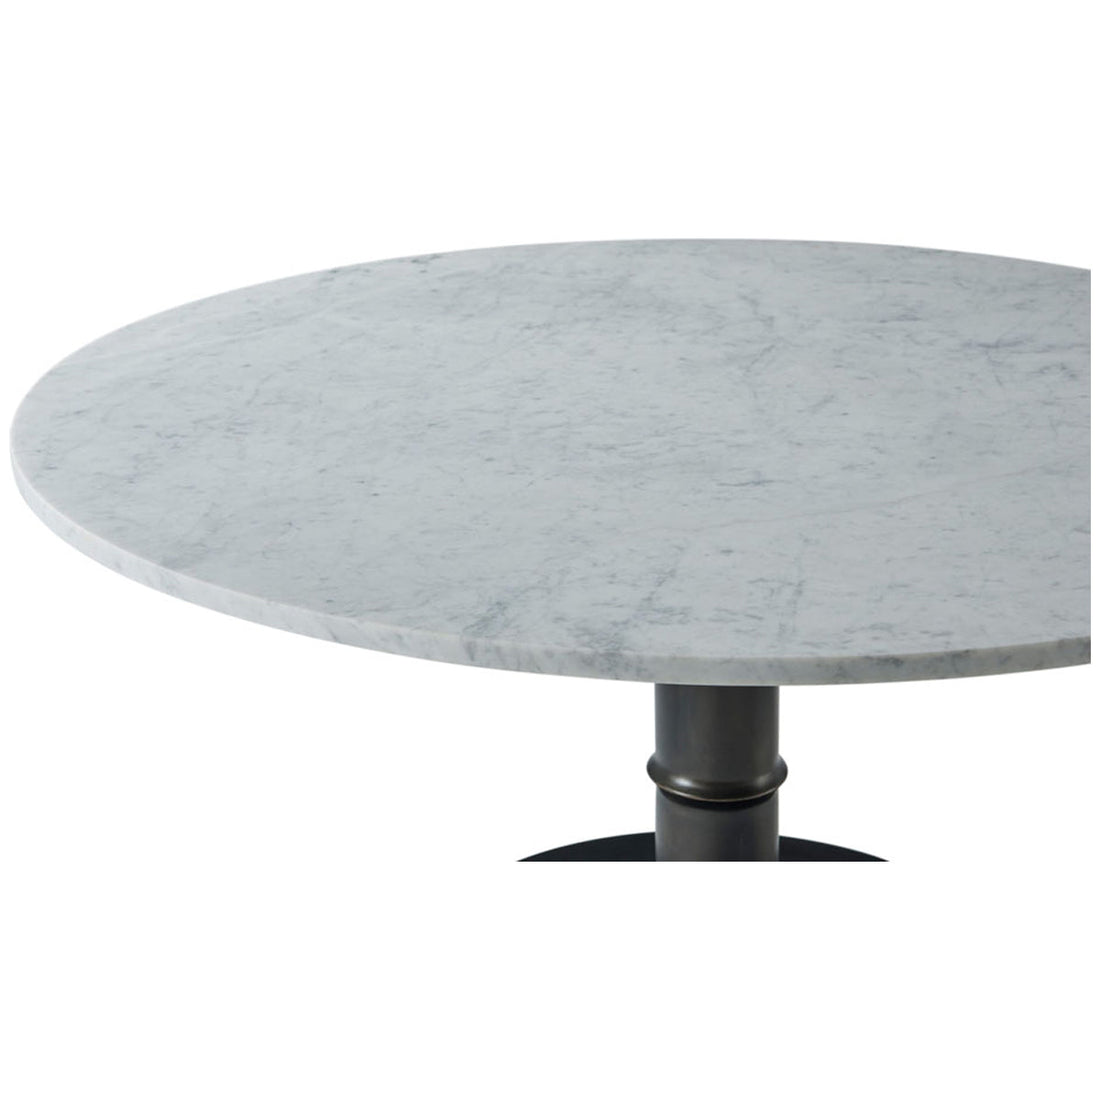 Theodore Alexander Kesden Round Dining Table - Romulus